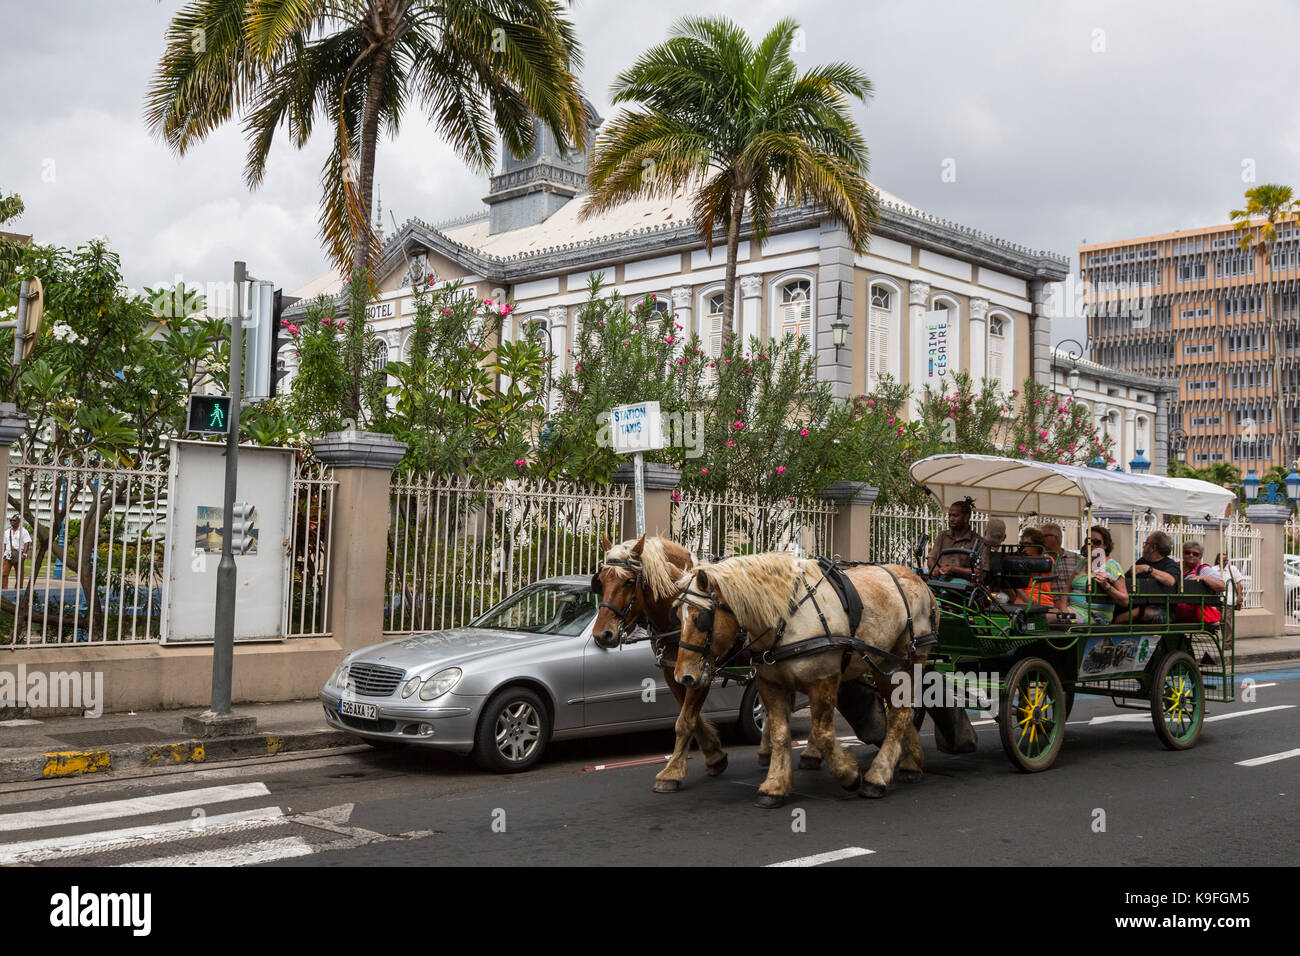 Fort-de-France, Martinique.  Tourists in a Horse-drawn Carriage Ride Past Former Hotel de Ville, Town Hall. Stock Photo